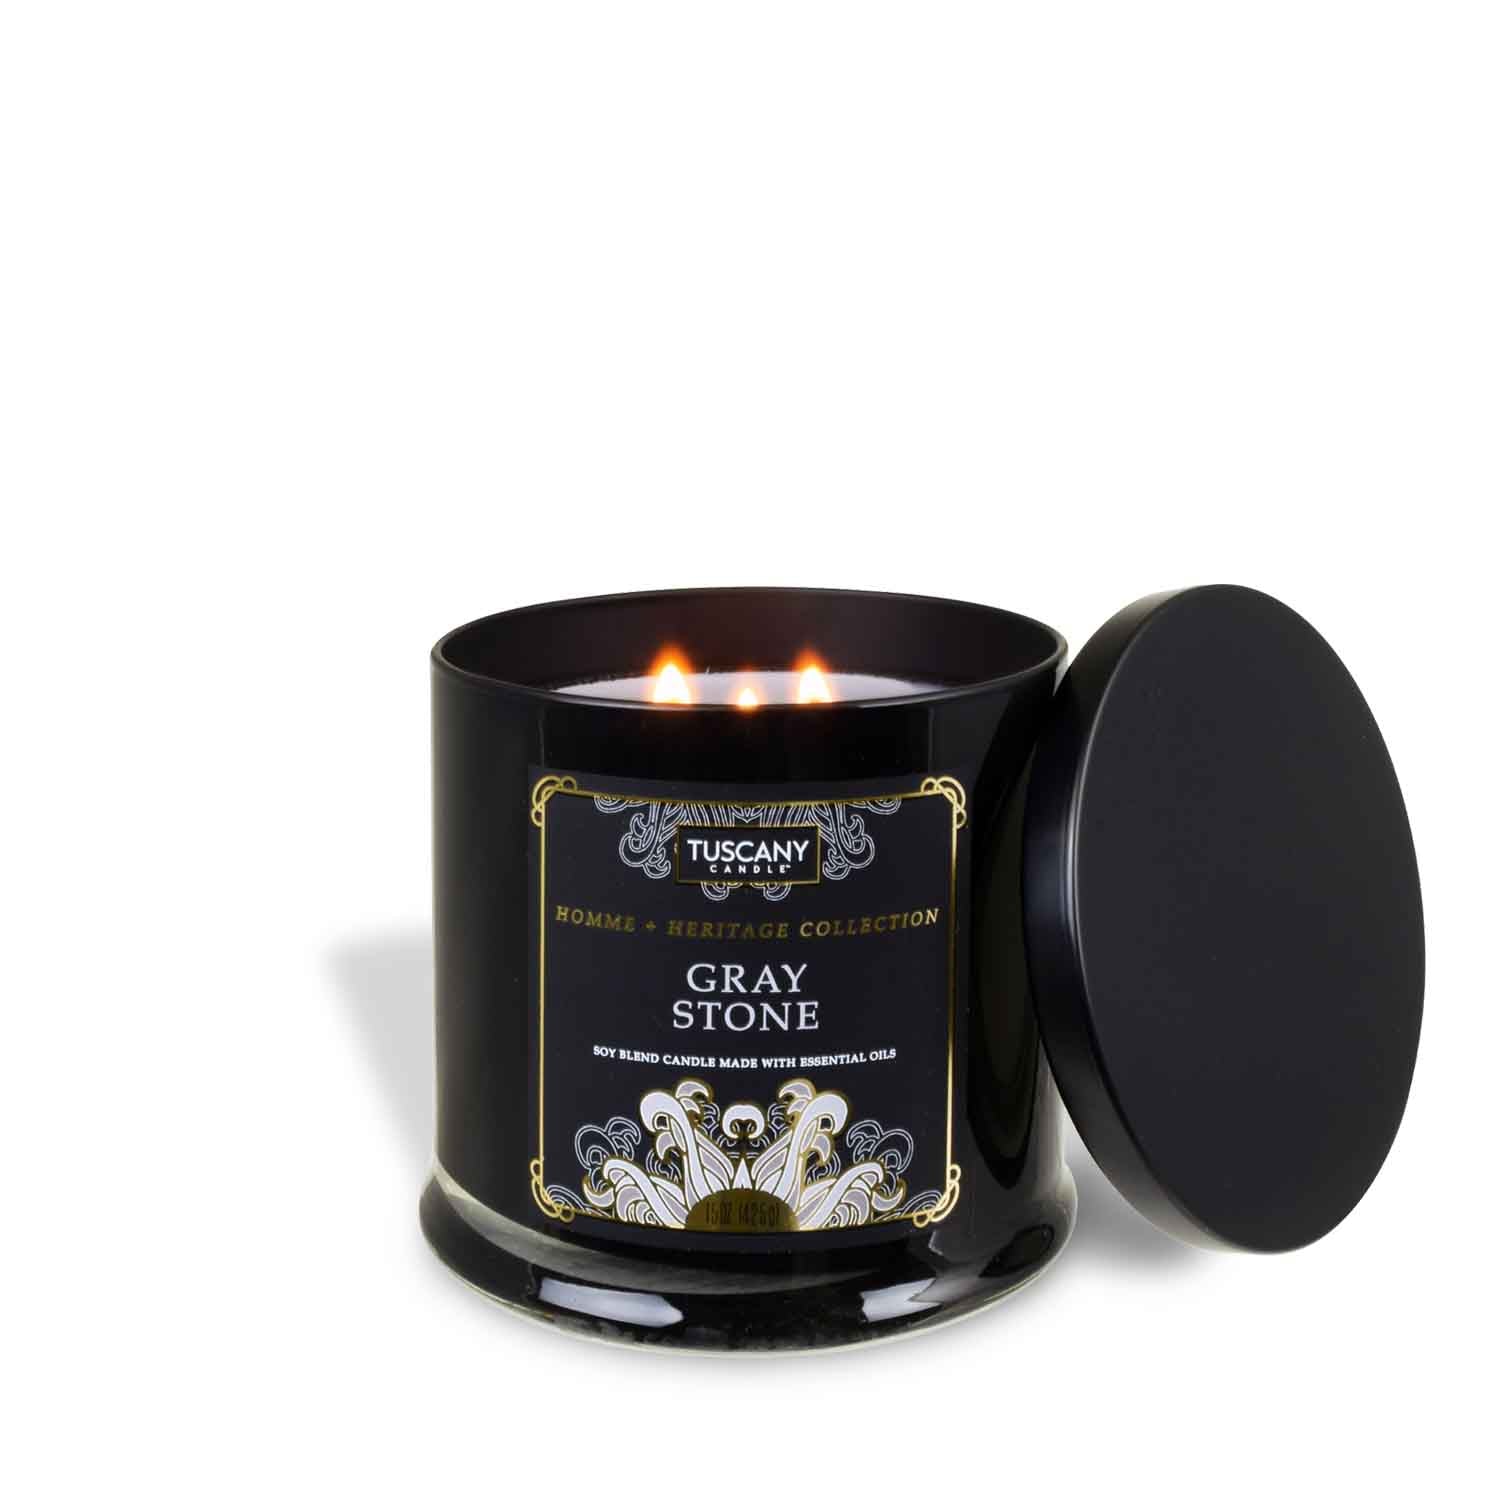 A Gray Stone scented jar candle with a gold lid, from the Homme + Heritage collection by Tuscany Candle.